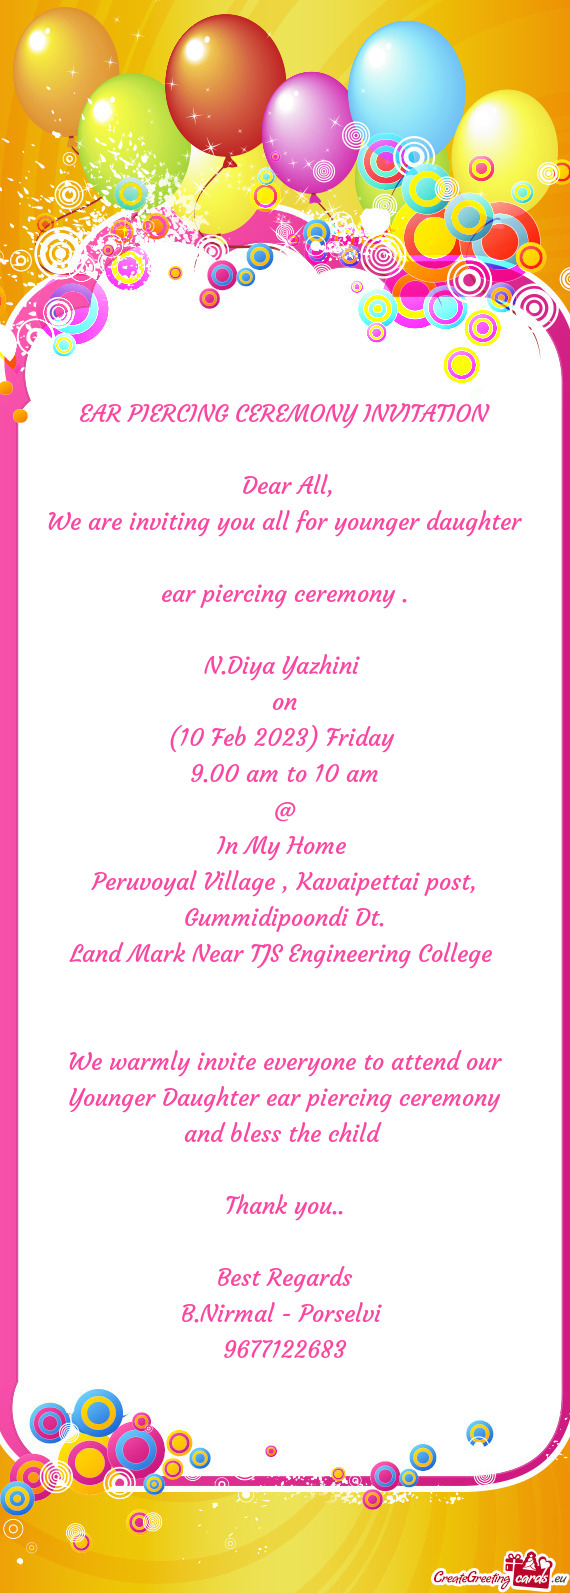 We are inviting you all for younger daughter ear piercing ceremony